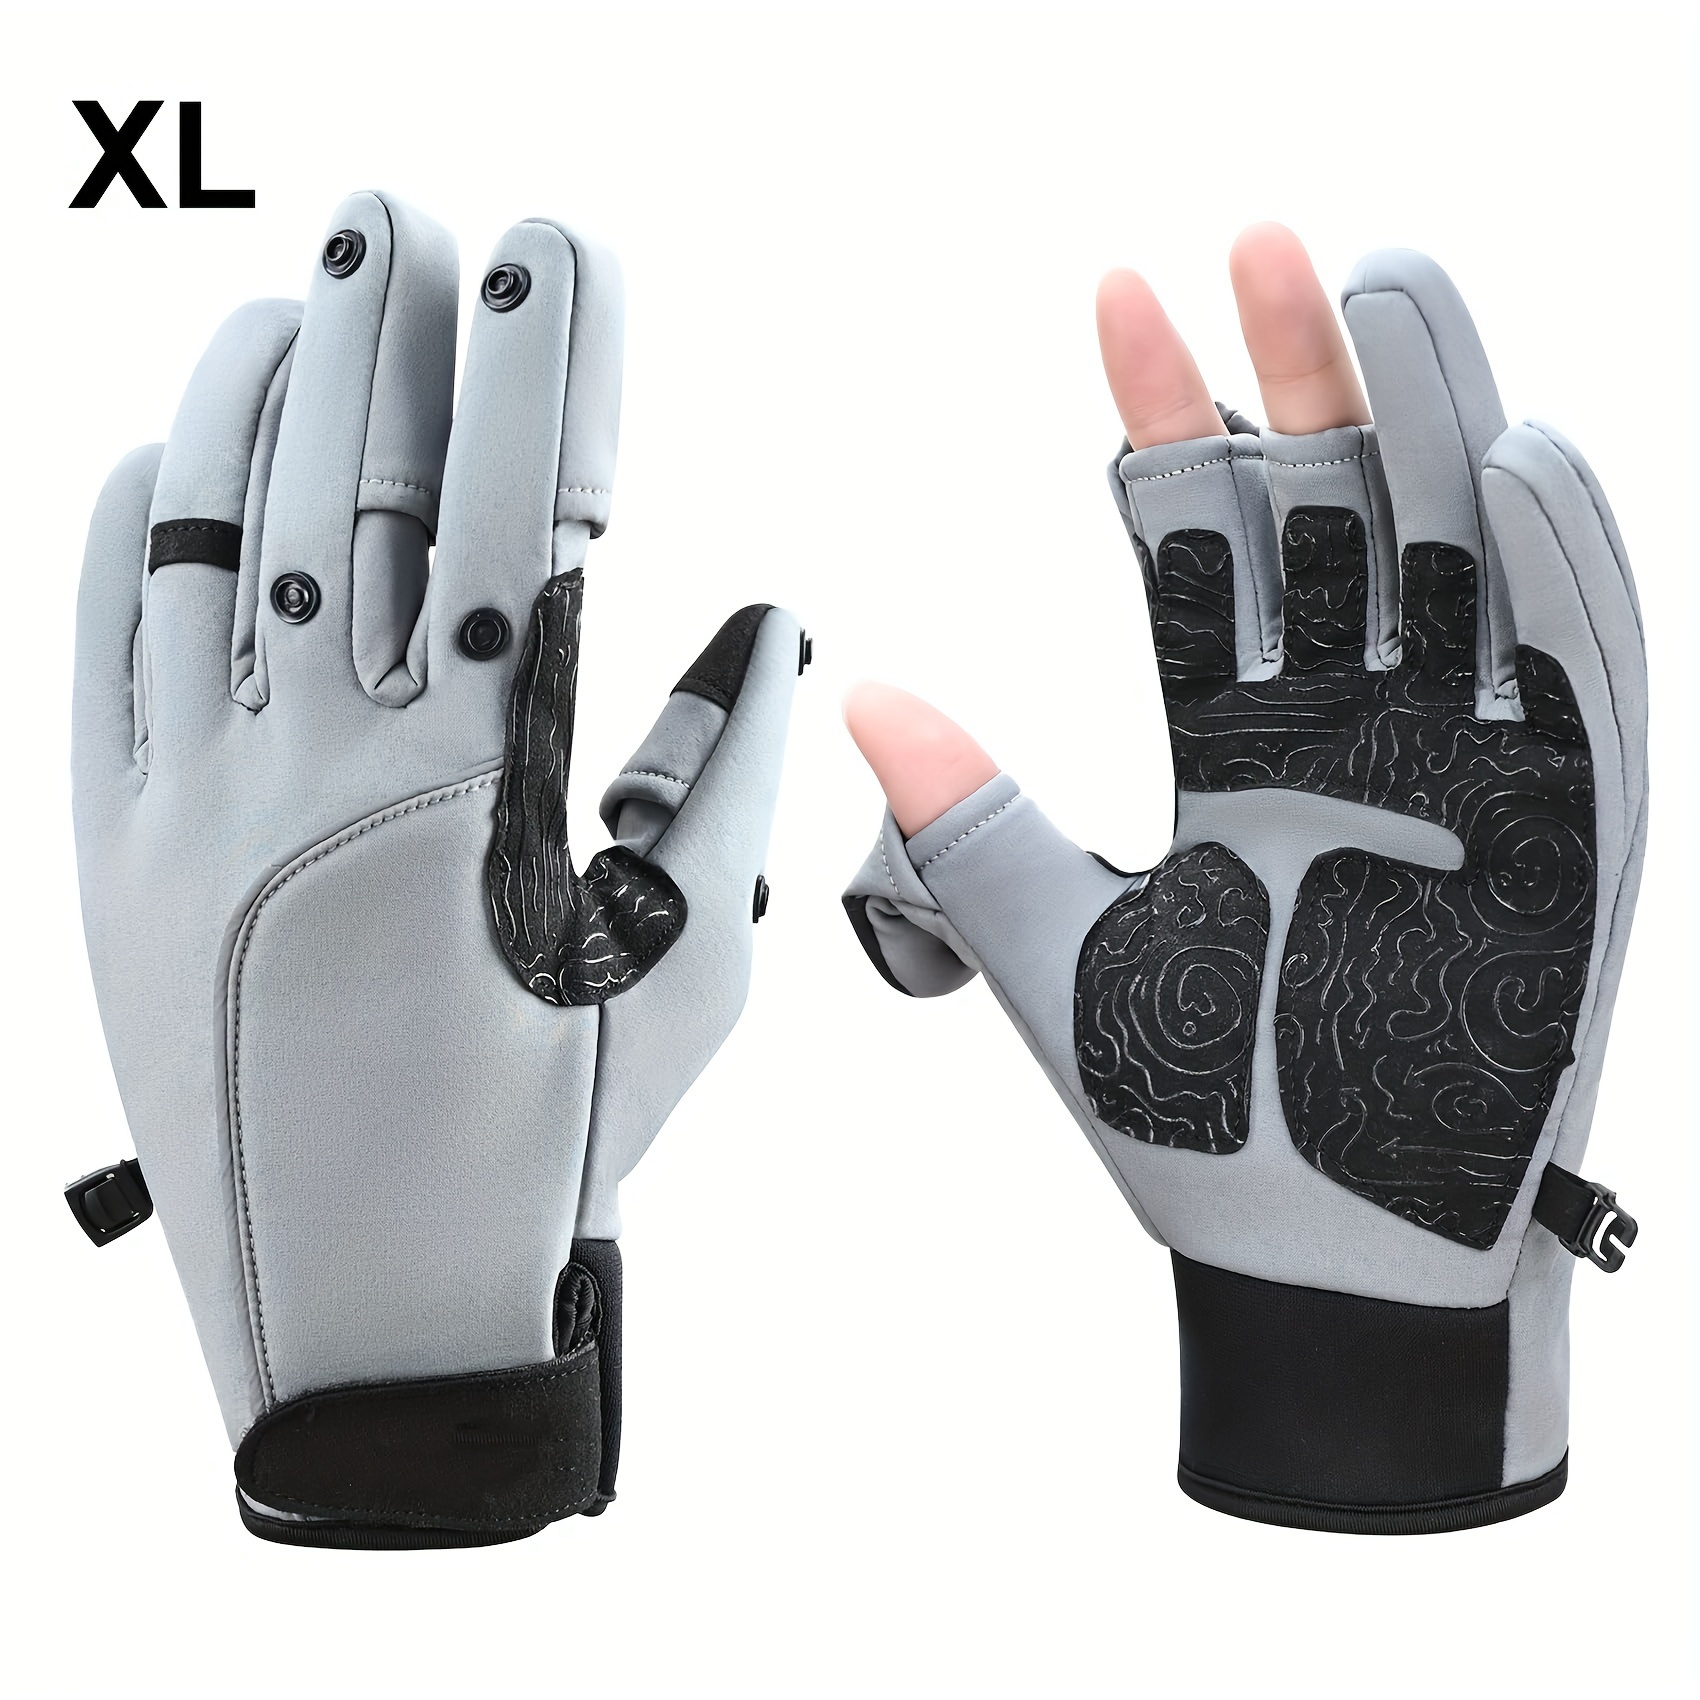 Winter Fishing Ice Fishing Gloves Waterproof, Windproof With 2